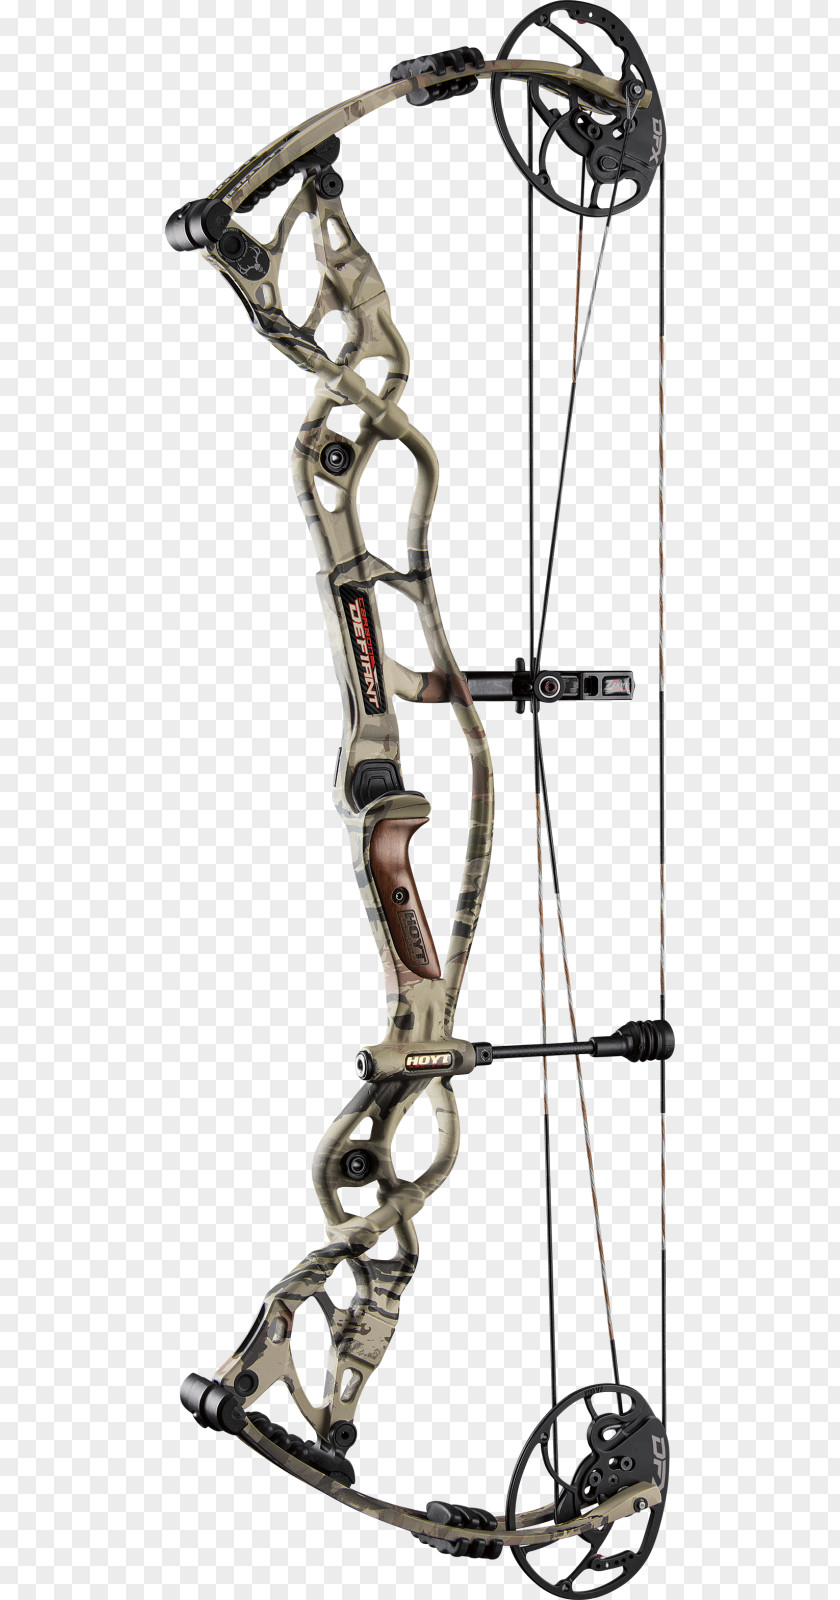 Archery Puppies Compound Bows Bowhunting Bow And Arrow PNG